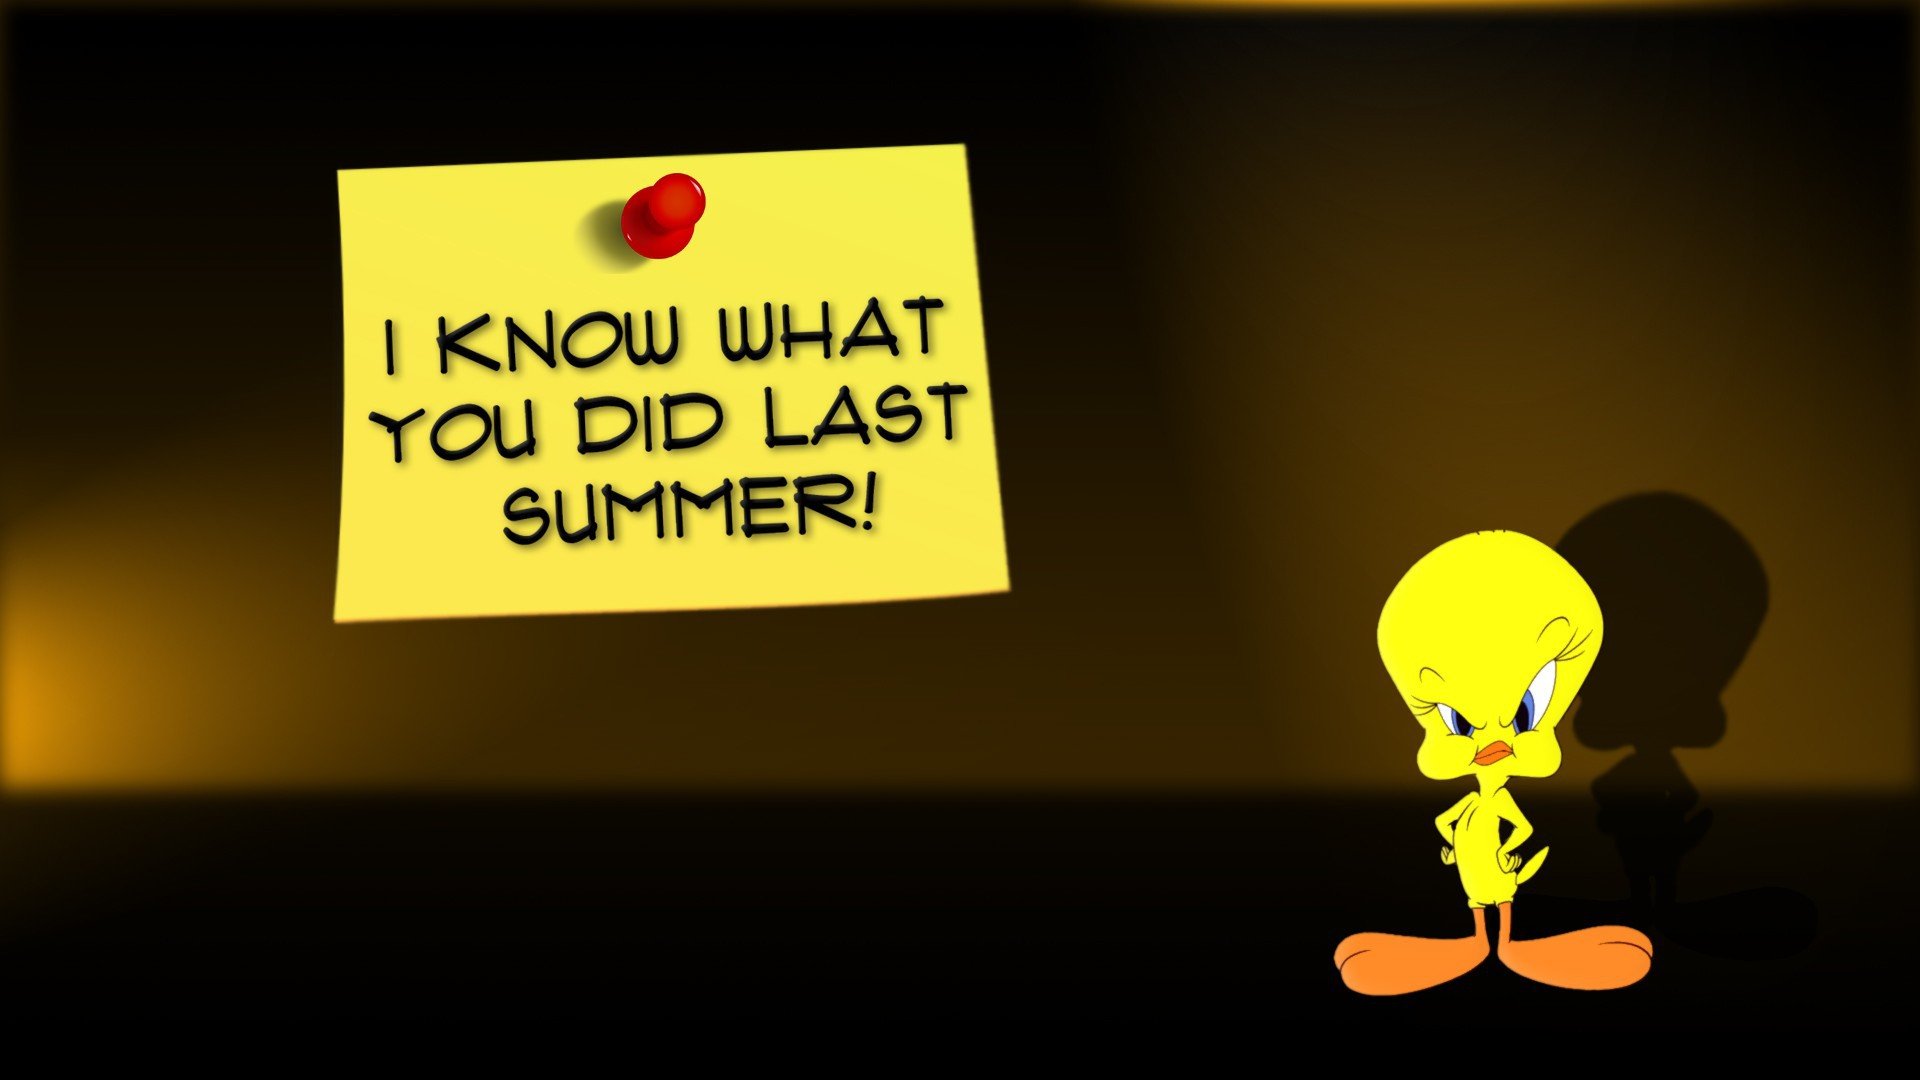 Chuck knows what you did last summer wallpaper and image, picture, photo